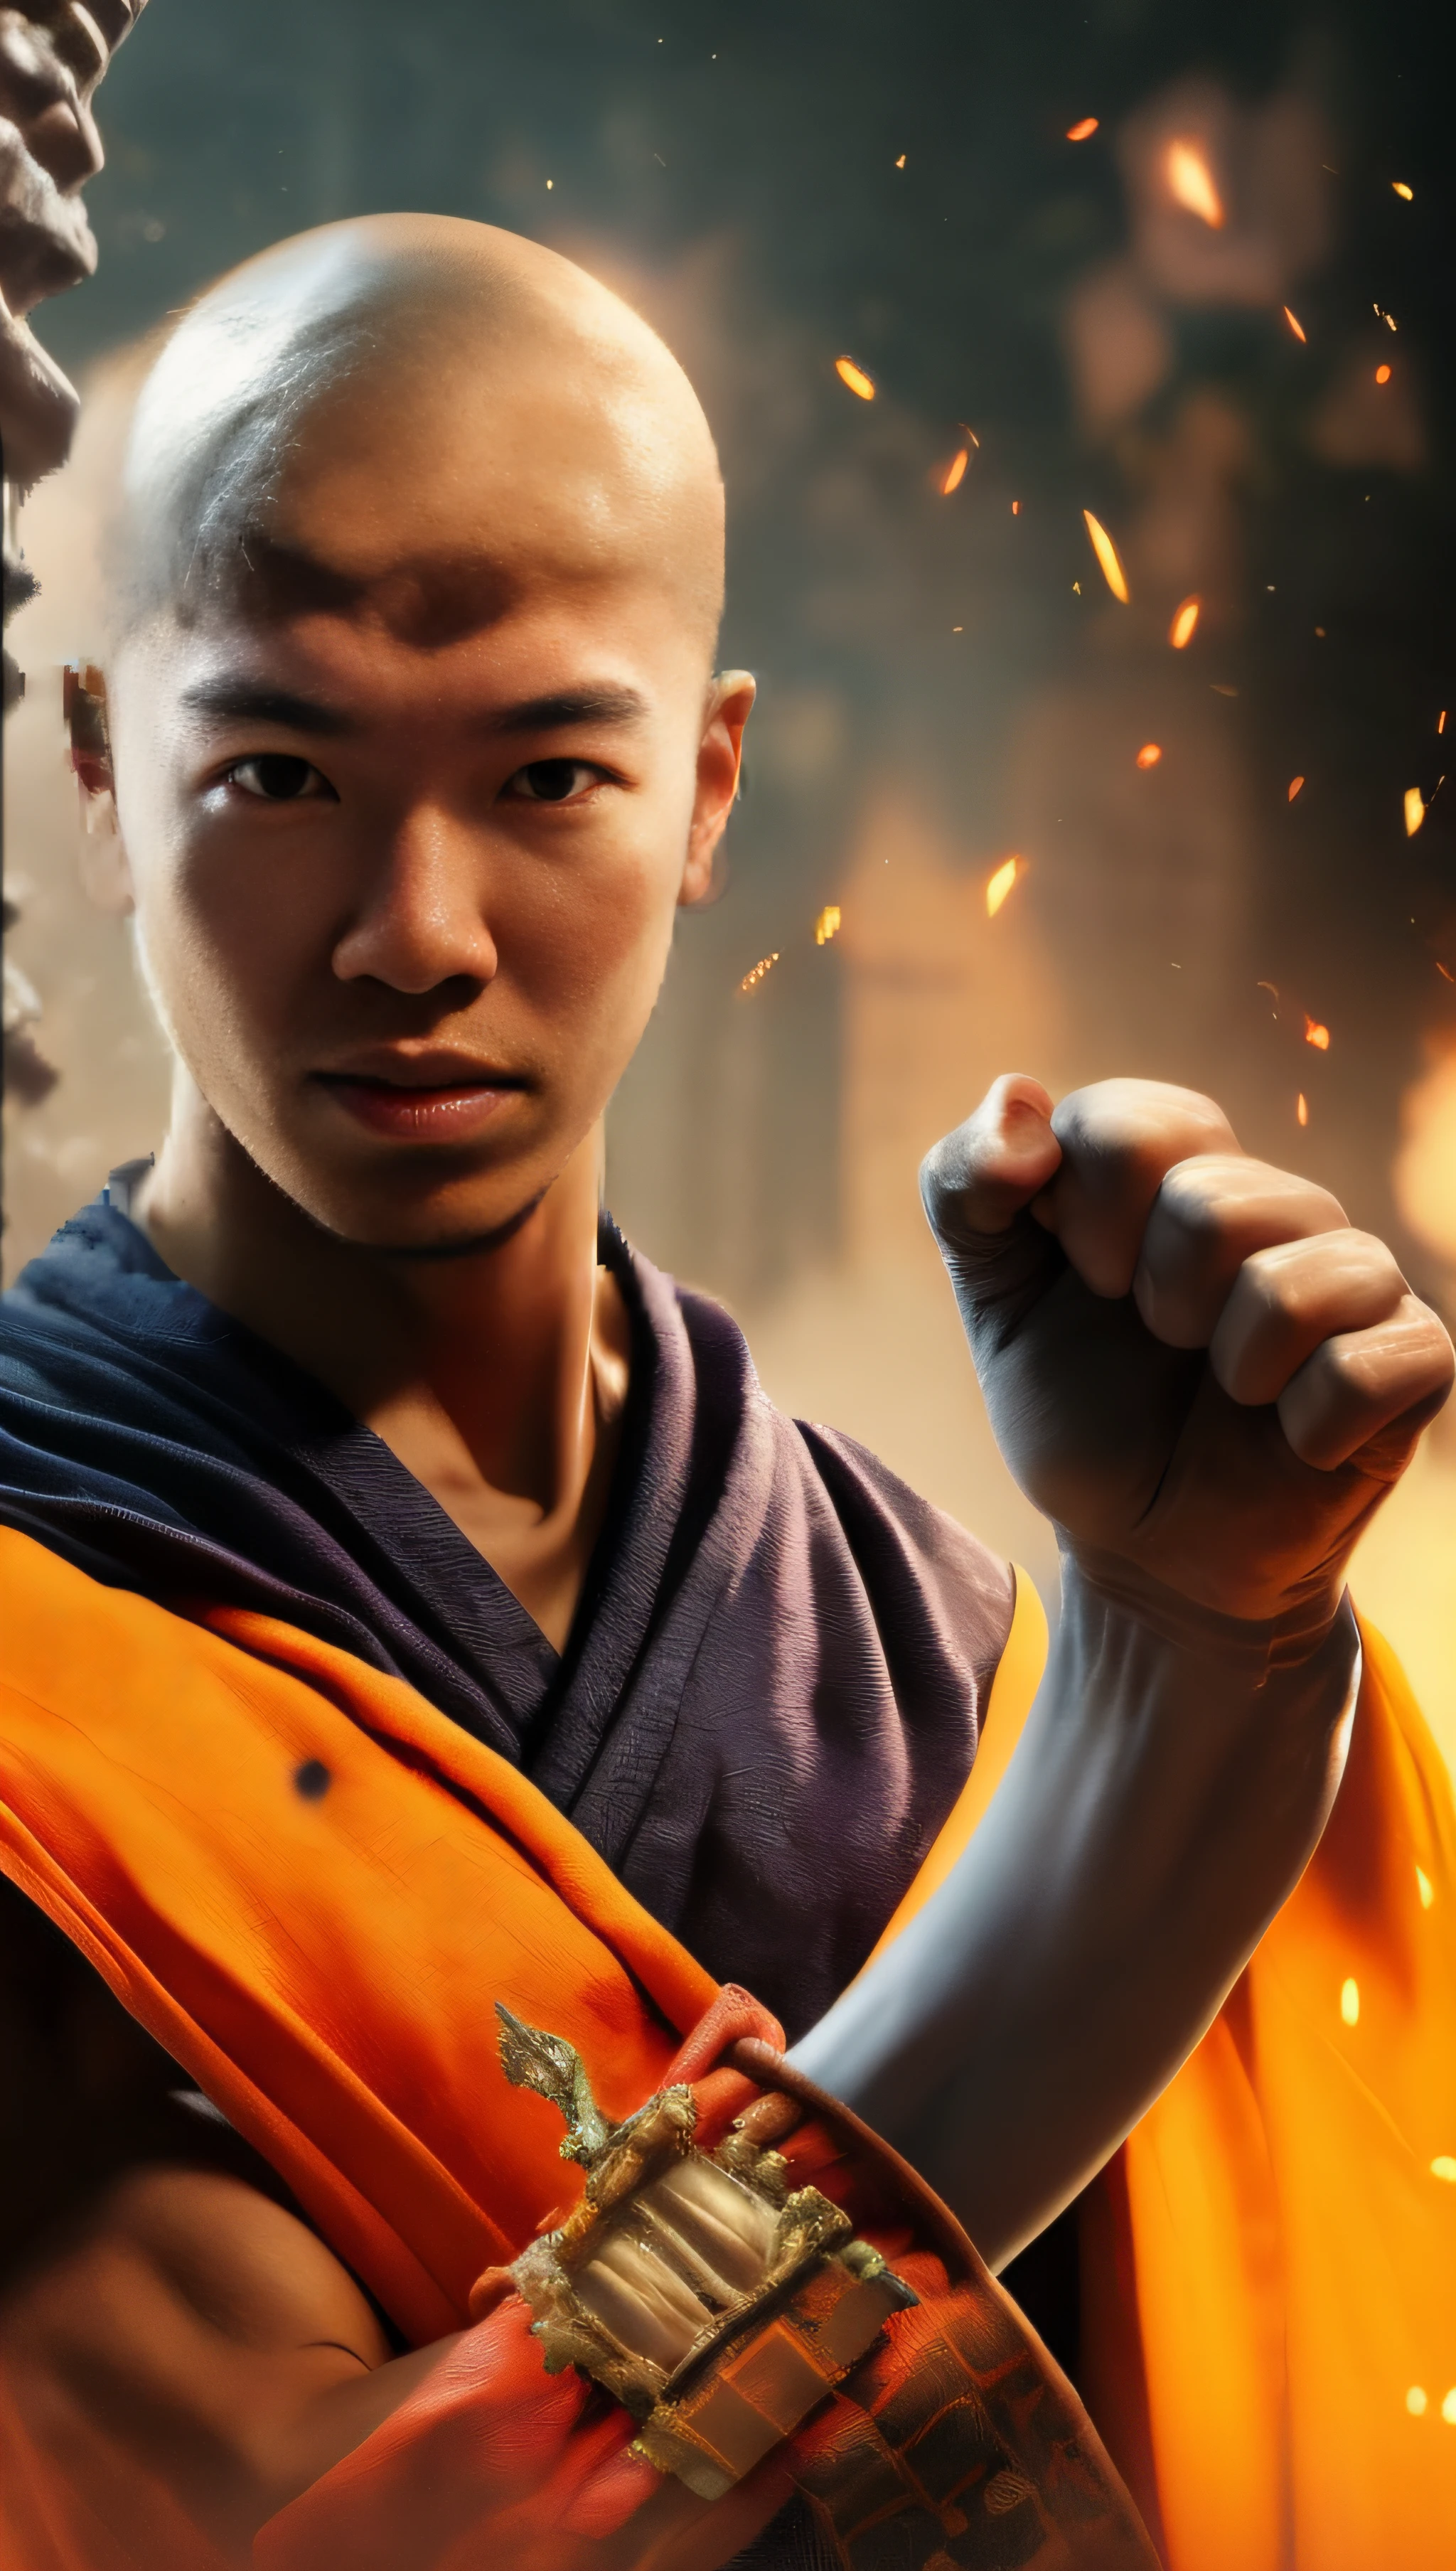 . Shaolin monk hyper - detailed, make a super power fist and destroys the world, cinematic 8k